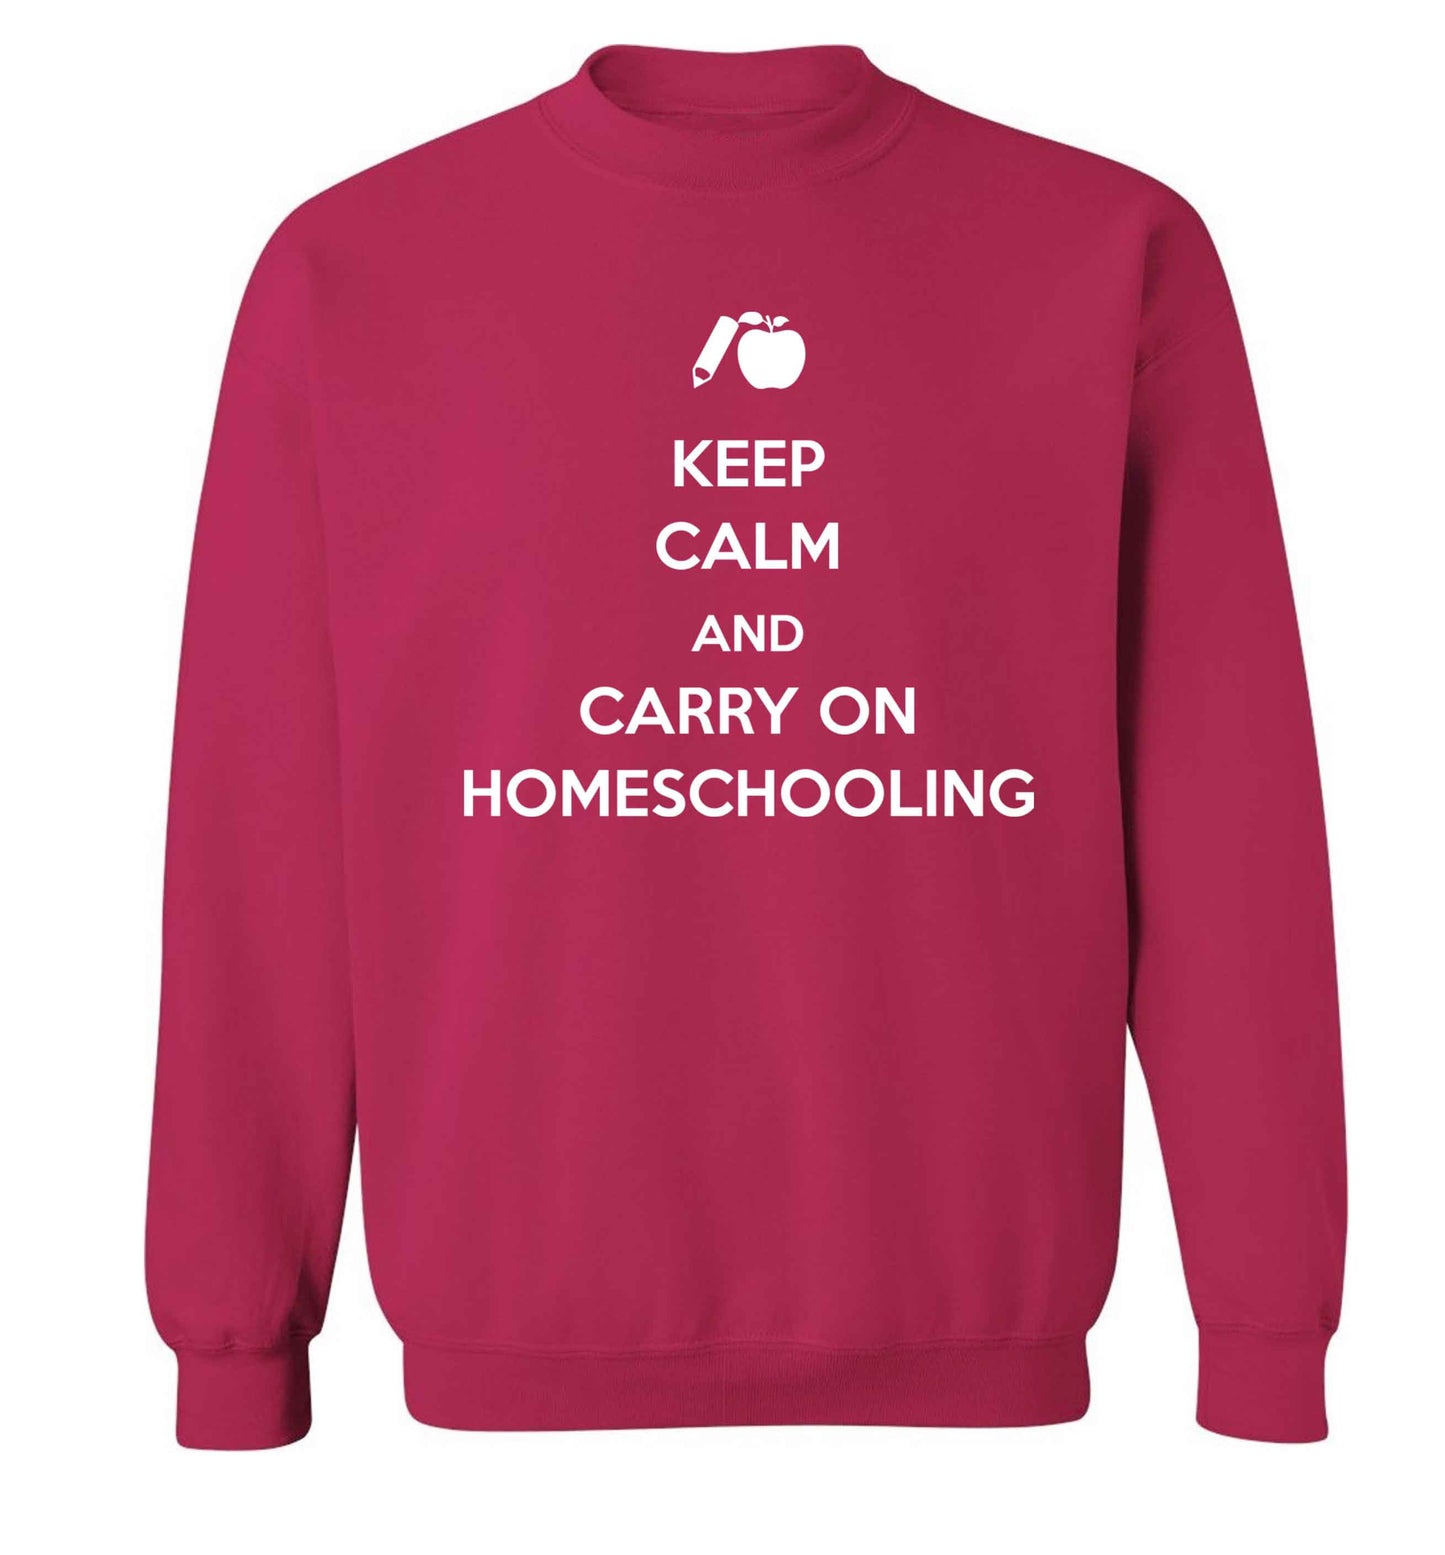 Keep calm and carry on homeschooling Adult's unisex pink Sweater 2XL